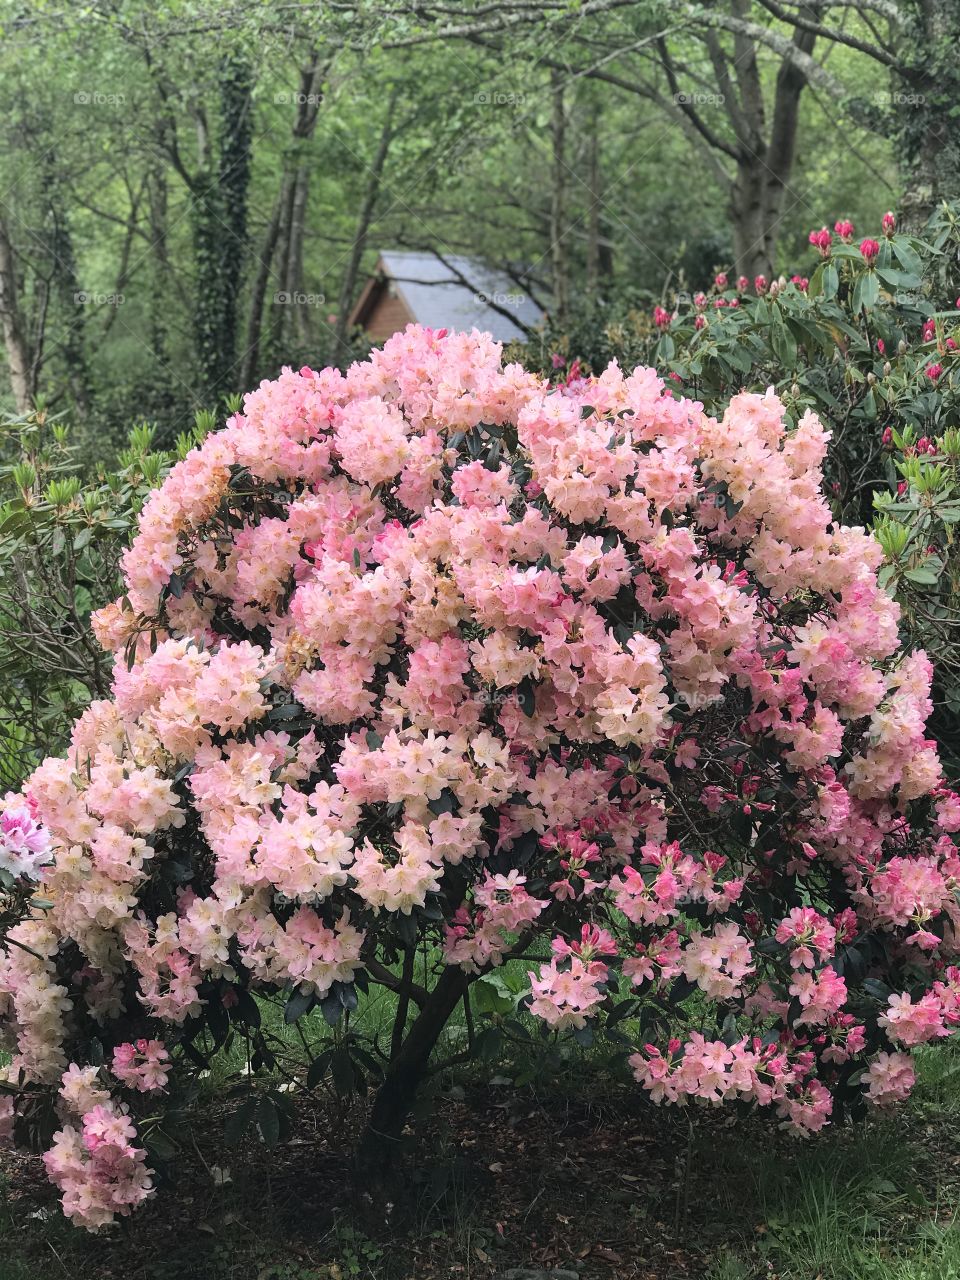 Lovely Rhododendron flowers 🌺 